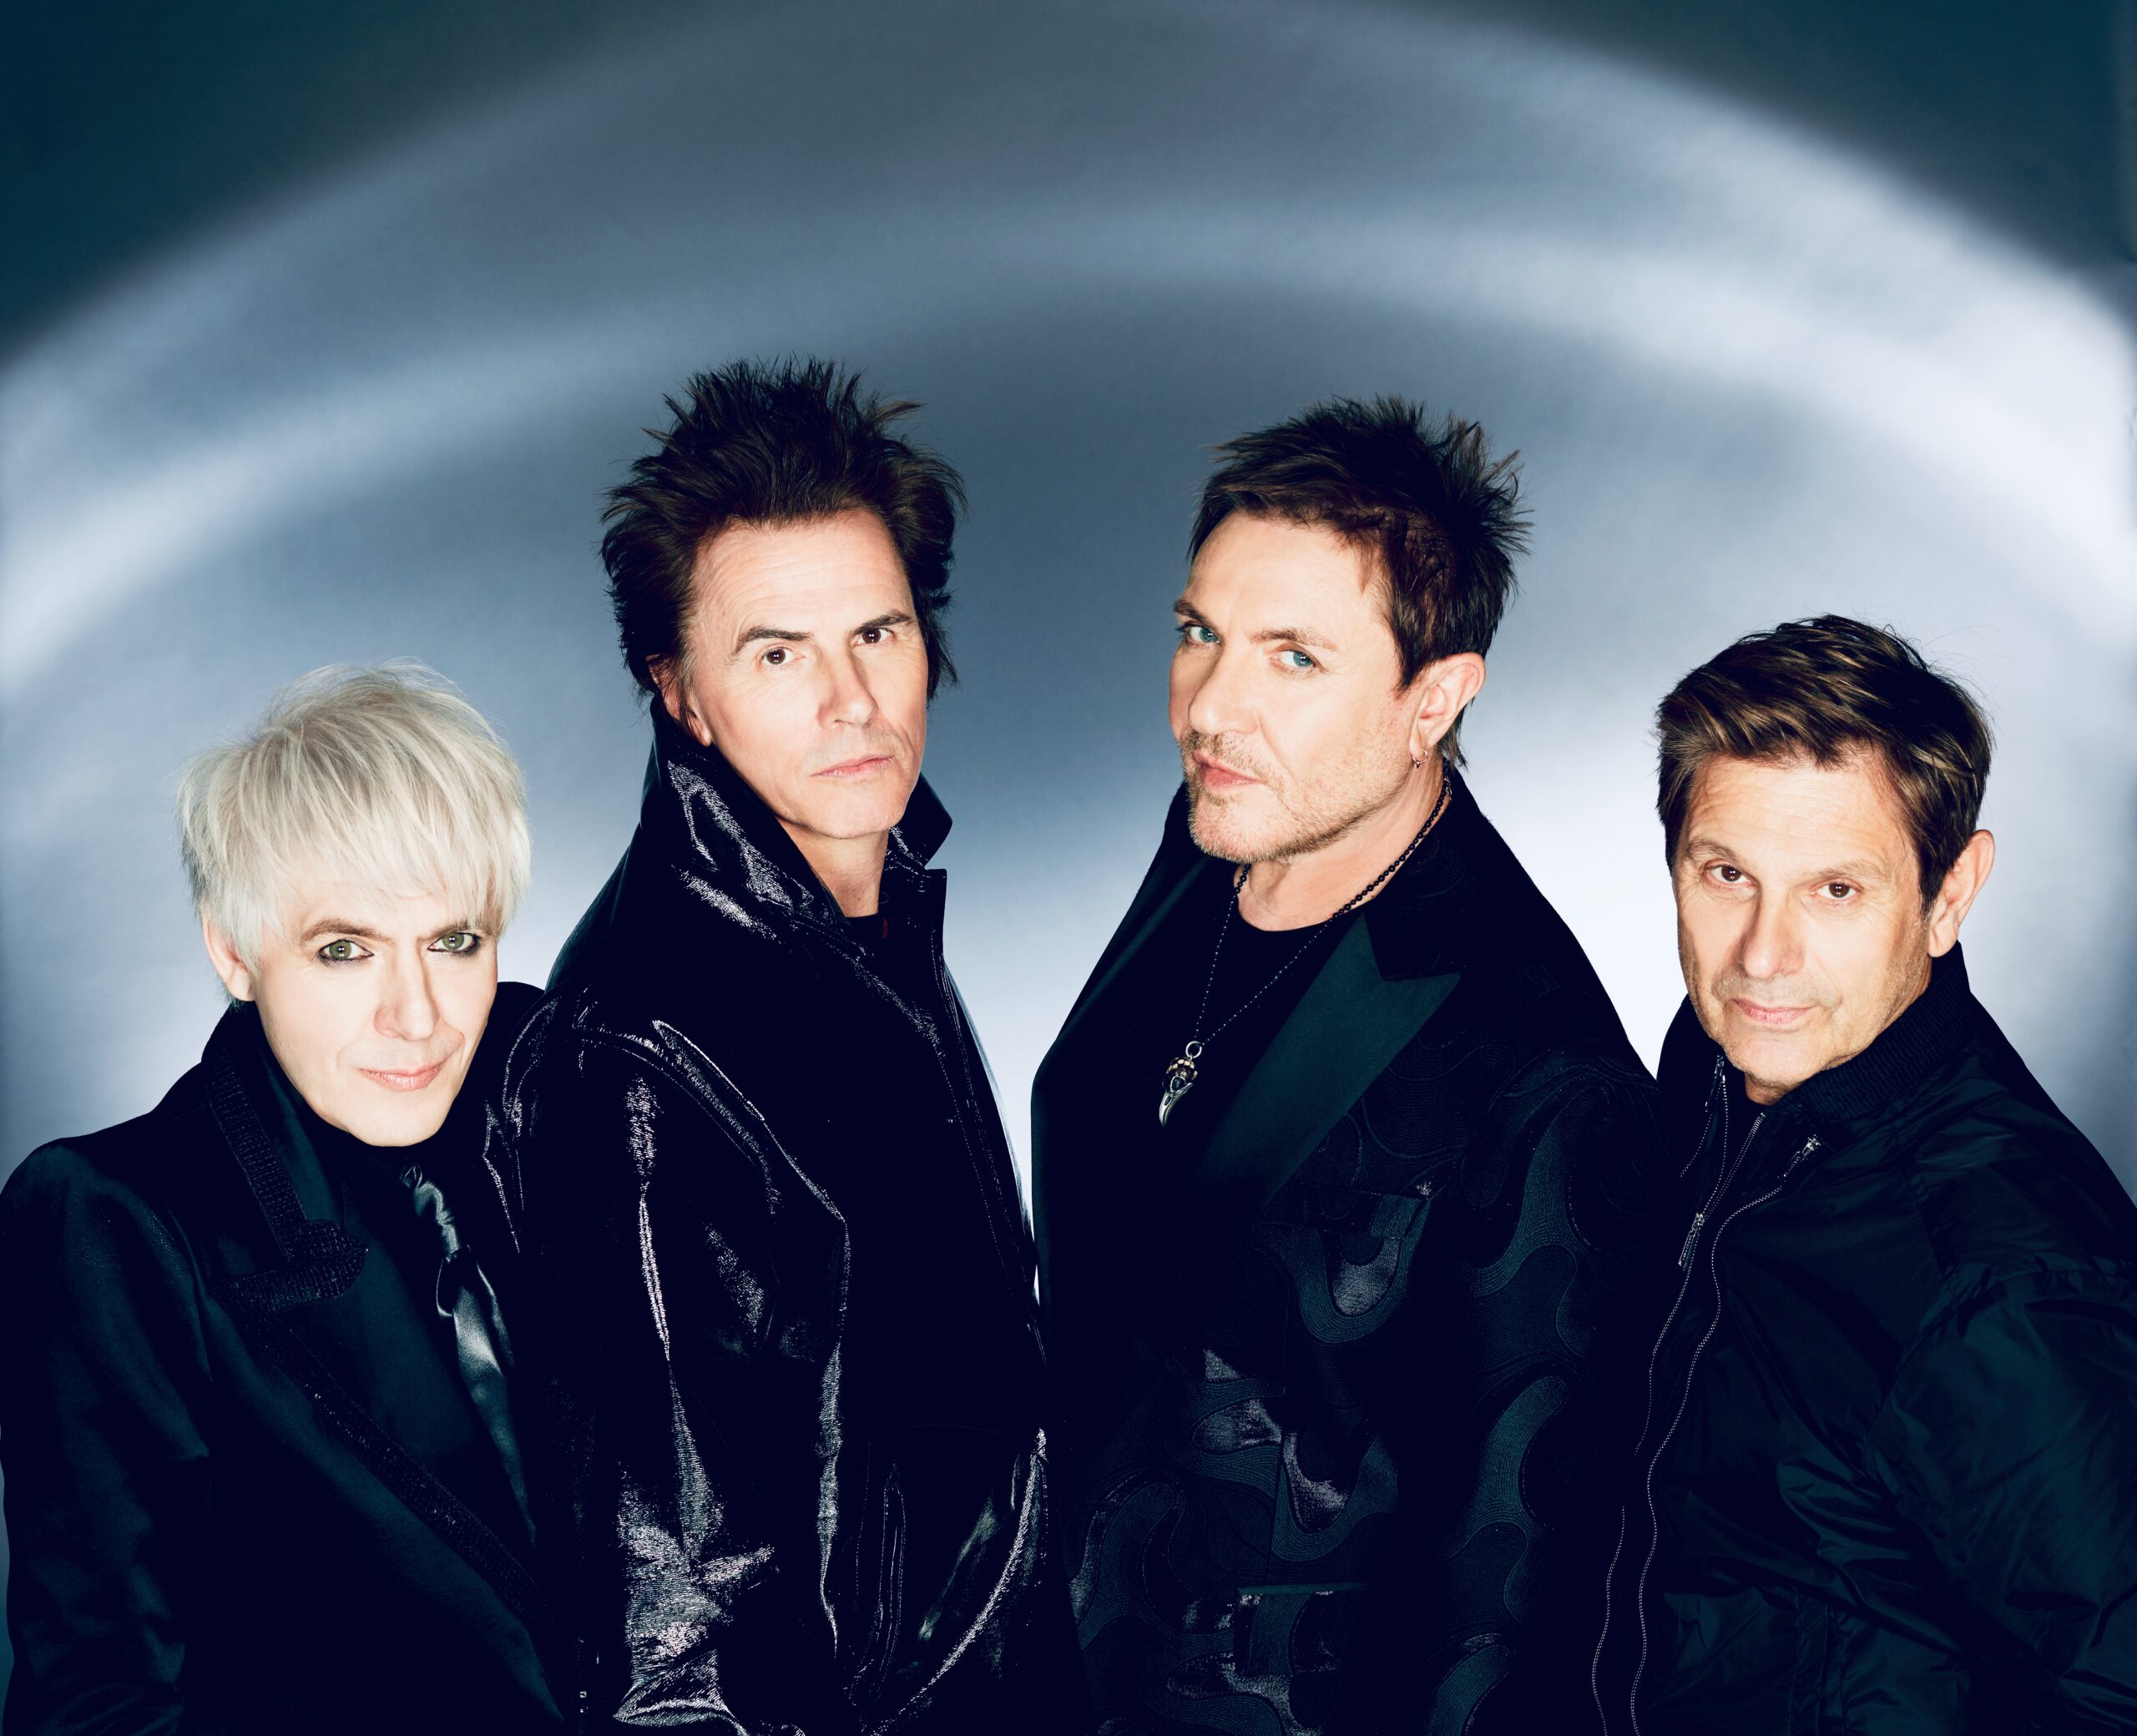 Duran Duran share groundbreaking new video ‘Anniversary’. Future Past out Friday, Oct 22